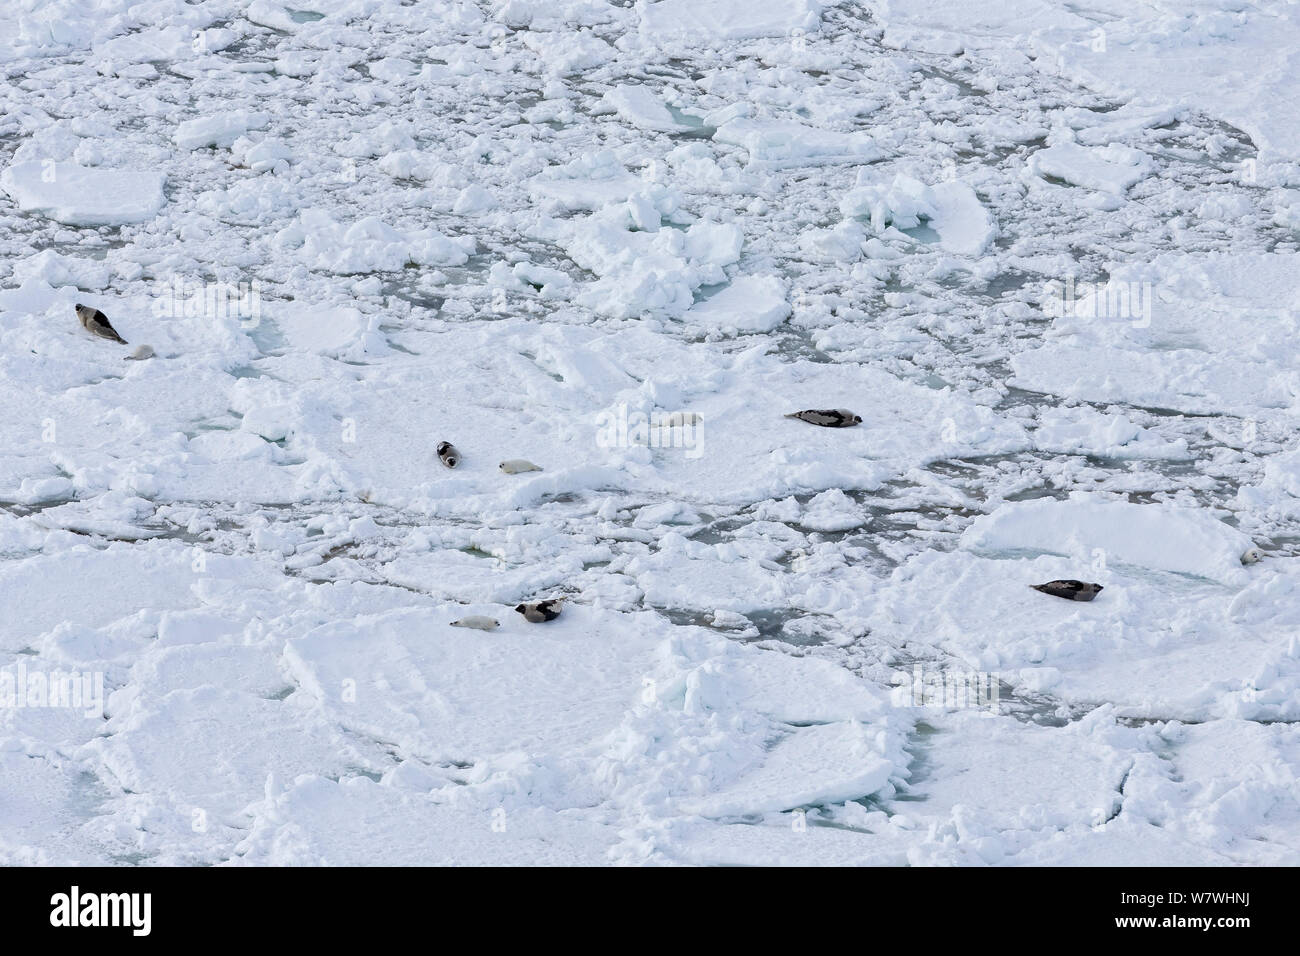 Aerial view of Harp seal (Phoca groenlandicus) females and pups on sea ice, Magdalen Islands, Gulf of St Lawrence, Quebec, Canada, March 2013. Stock Photo